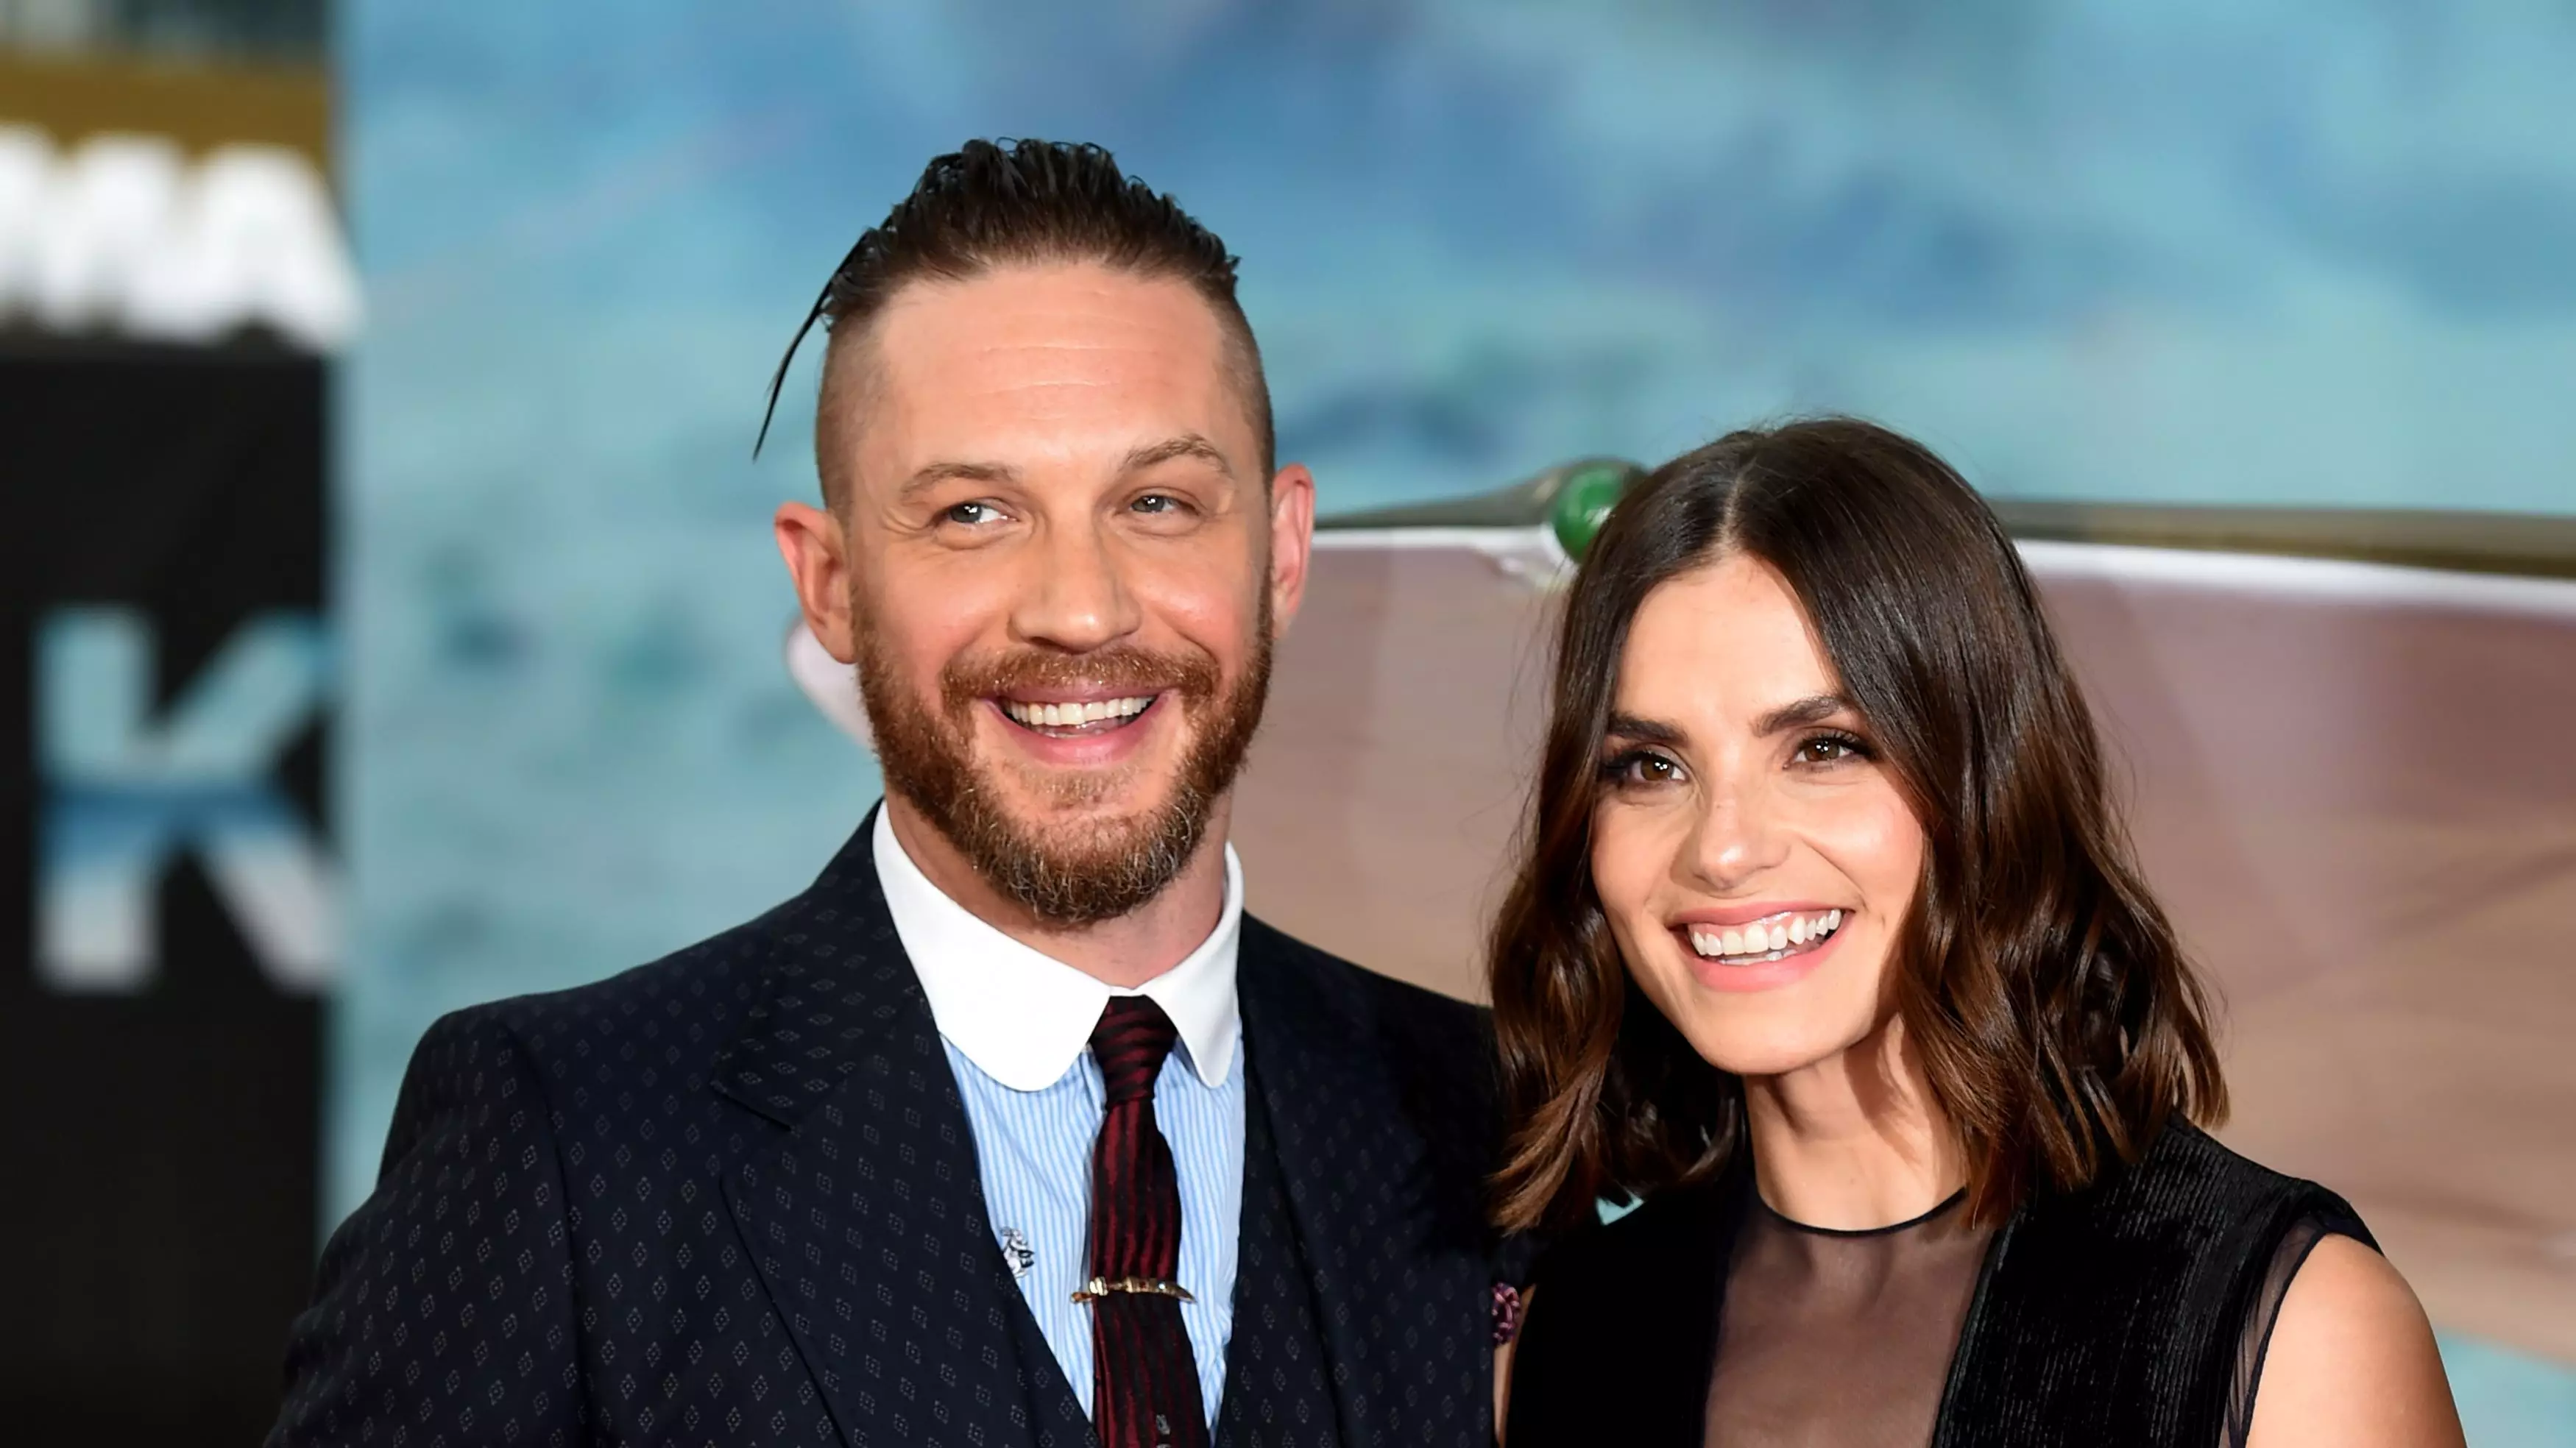 Tom Hardy 'Didn’t Want' To Leave BBC's 'Peaky Blinders', Says Co-Star